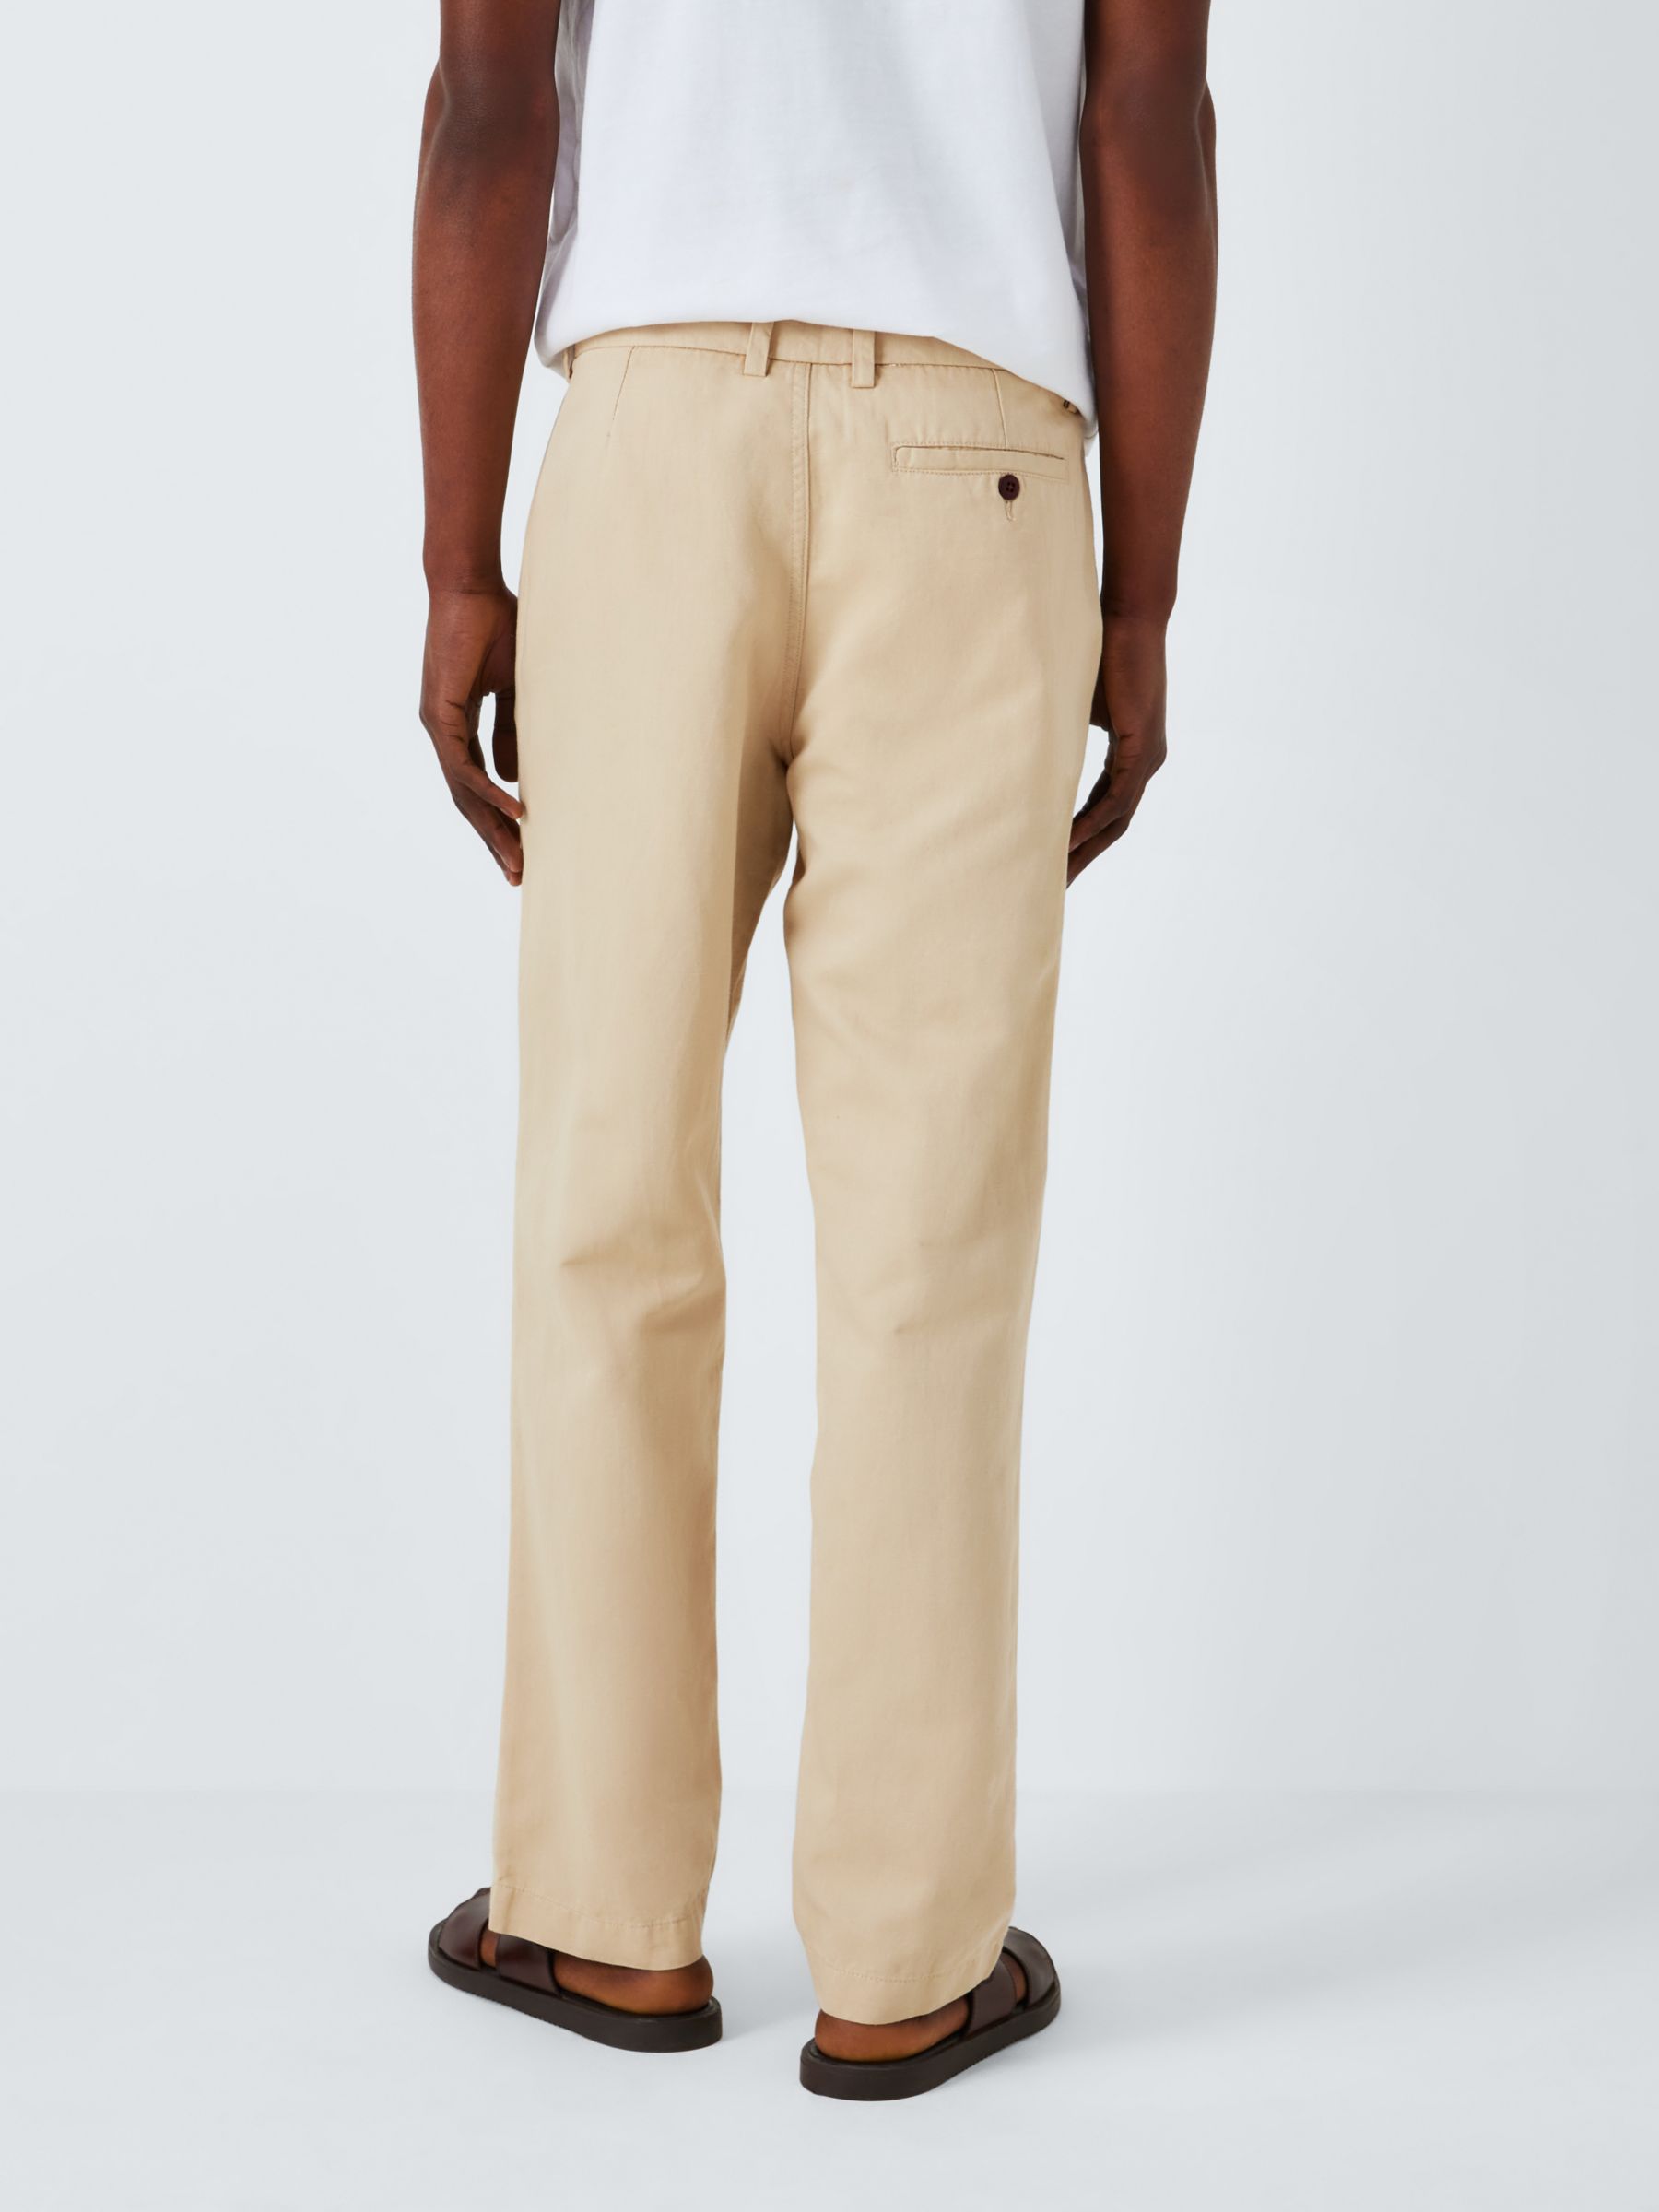 John Lewis Straight Fit Cotton Linen Chinos, Natural, 38S